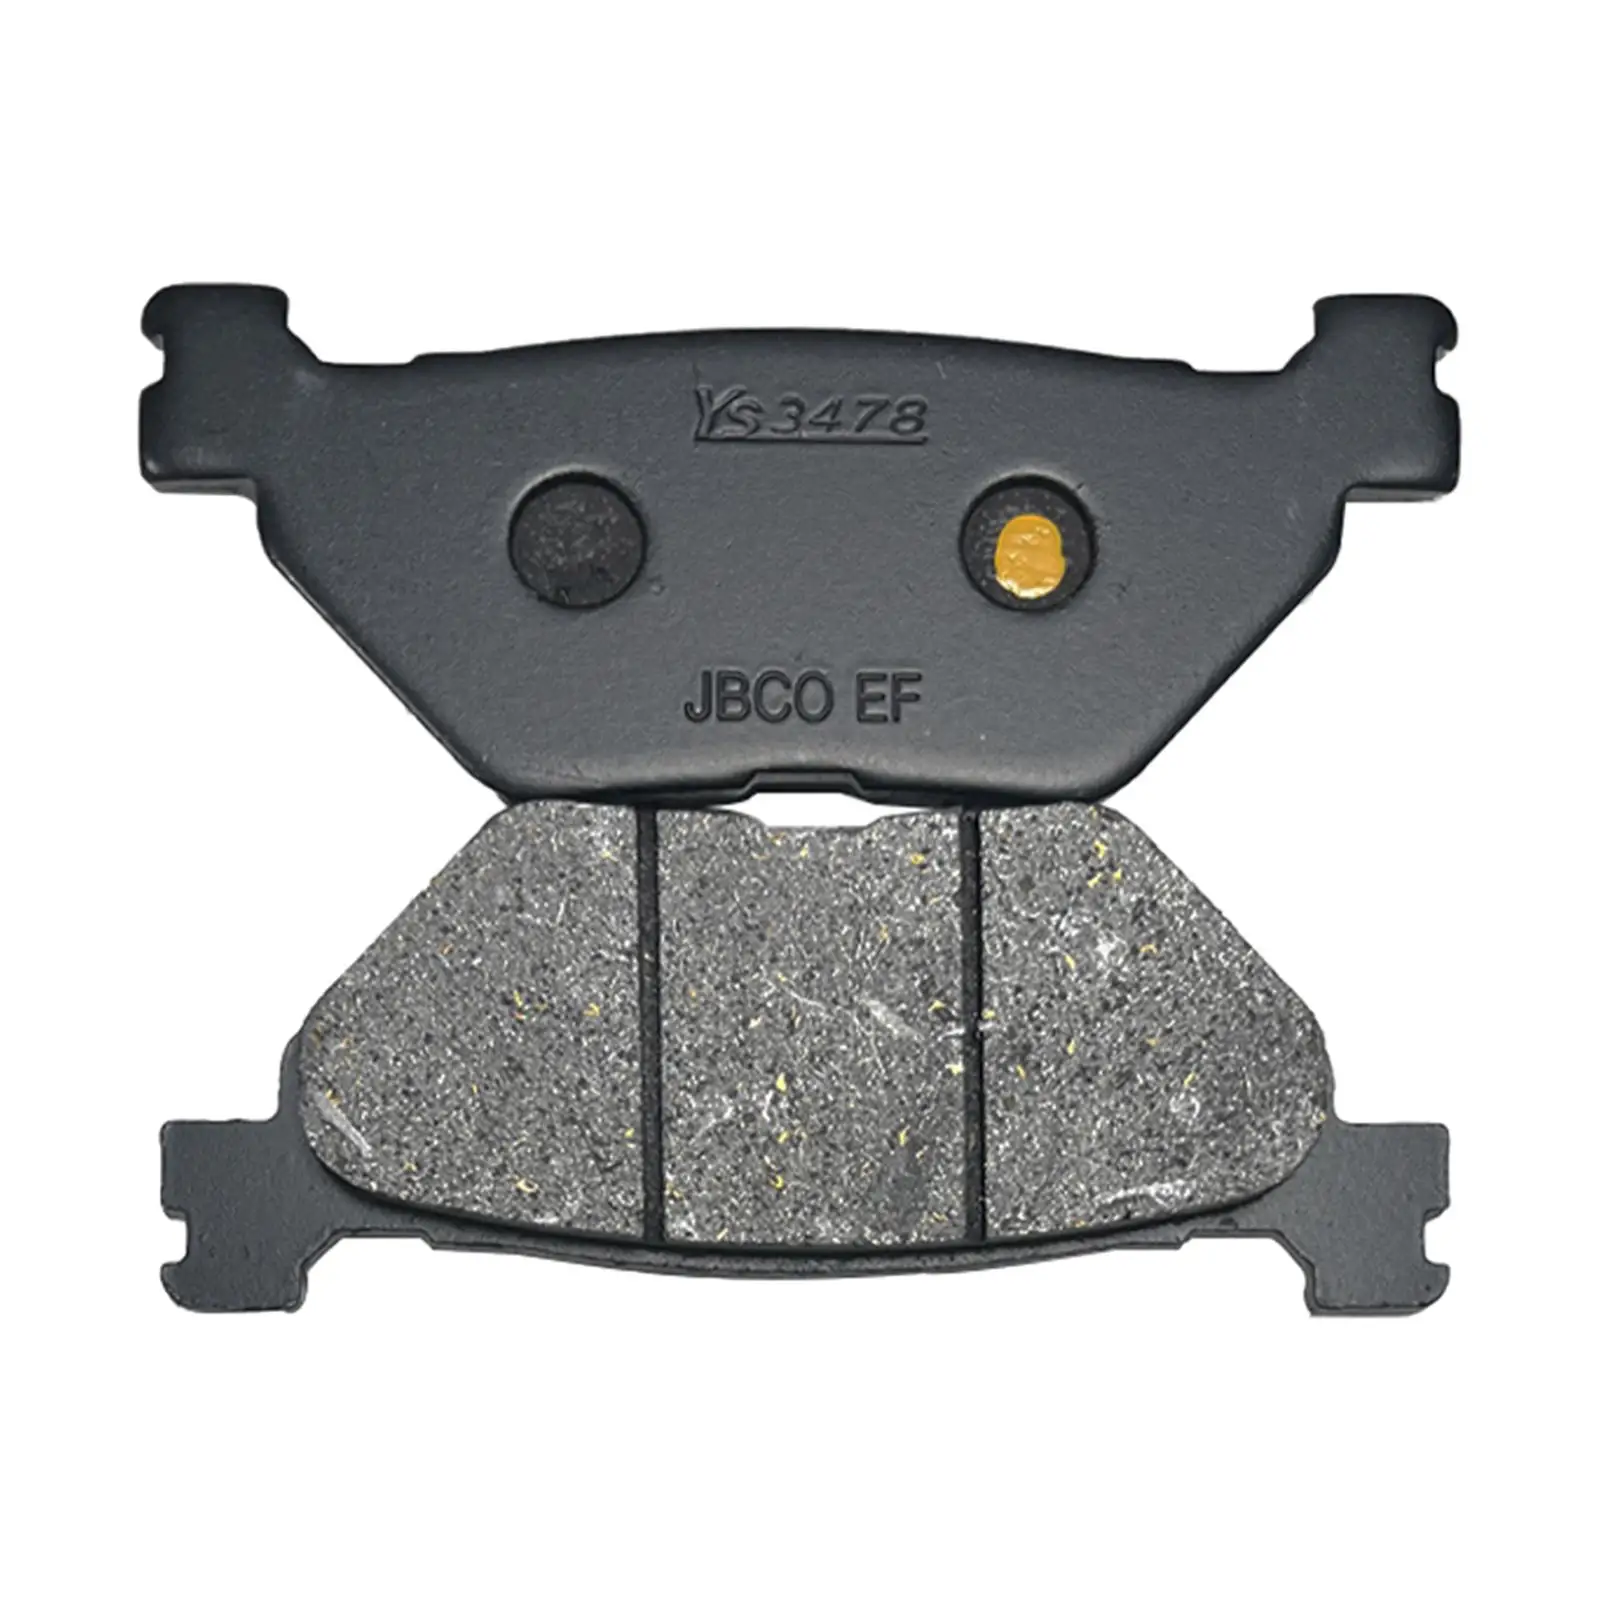 Brake Pads Kit Accessories for Tdm 900 Lightweight Vehicle Repair Parts